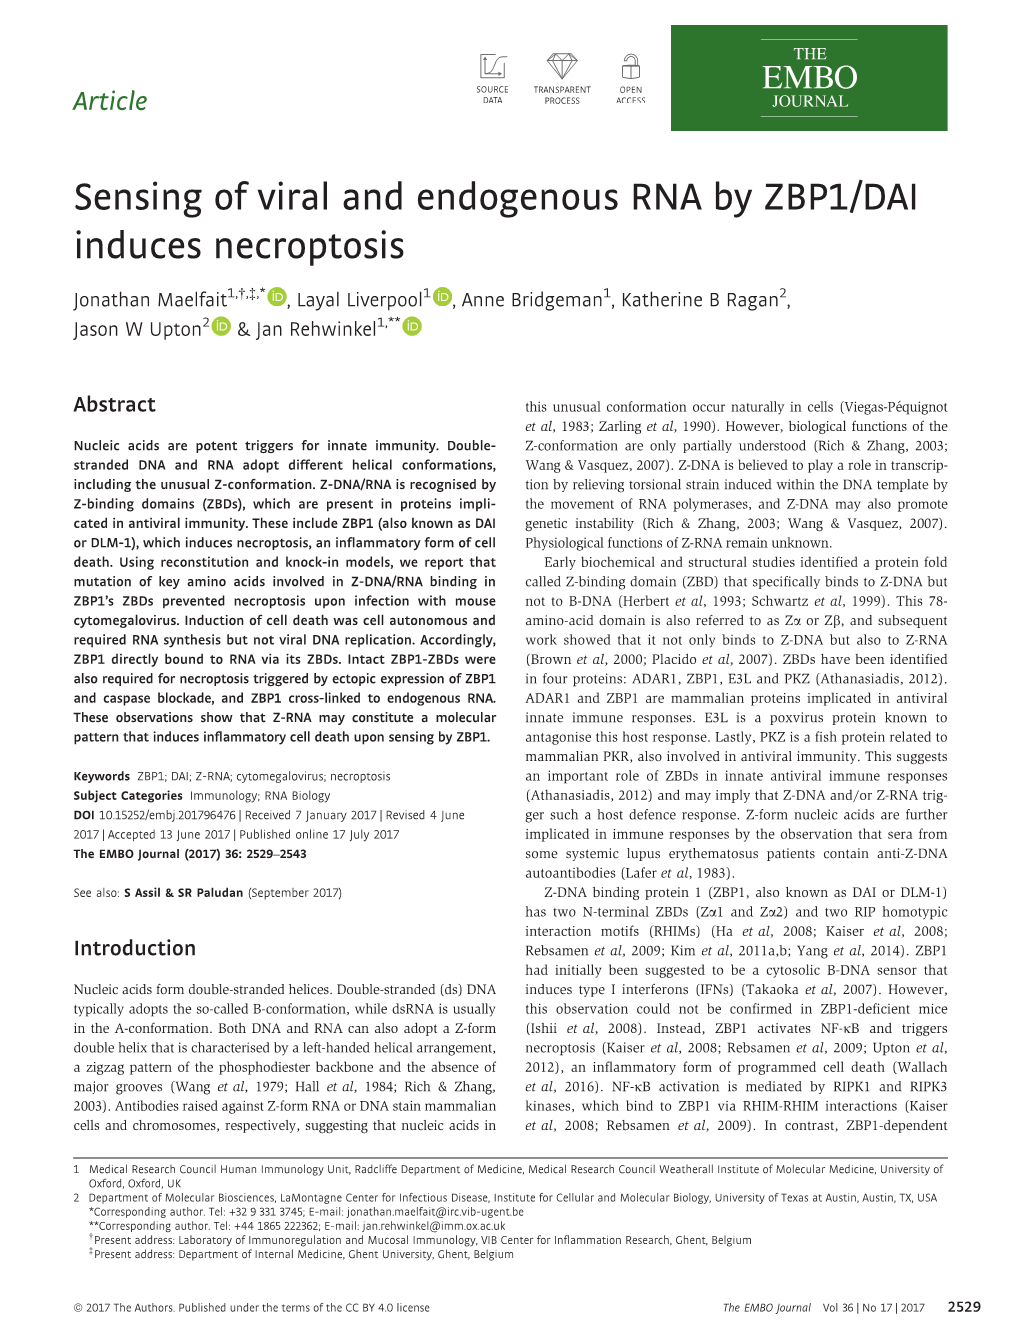 Sensing of Viral and Endogenous RNA by ZBP1&#X002f